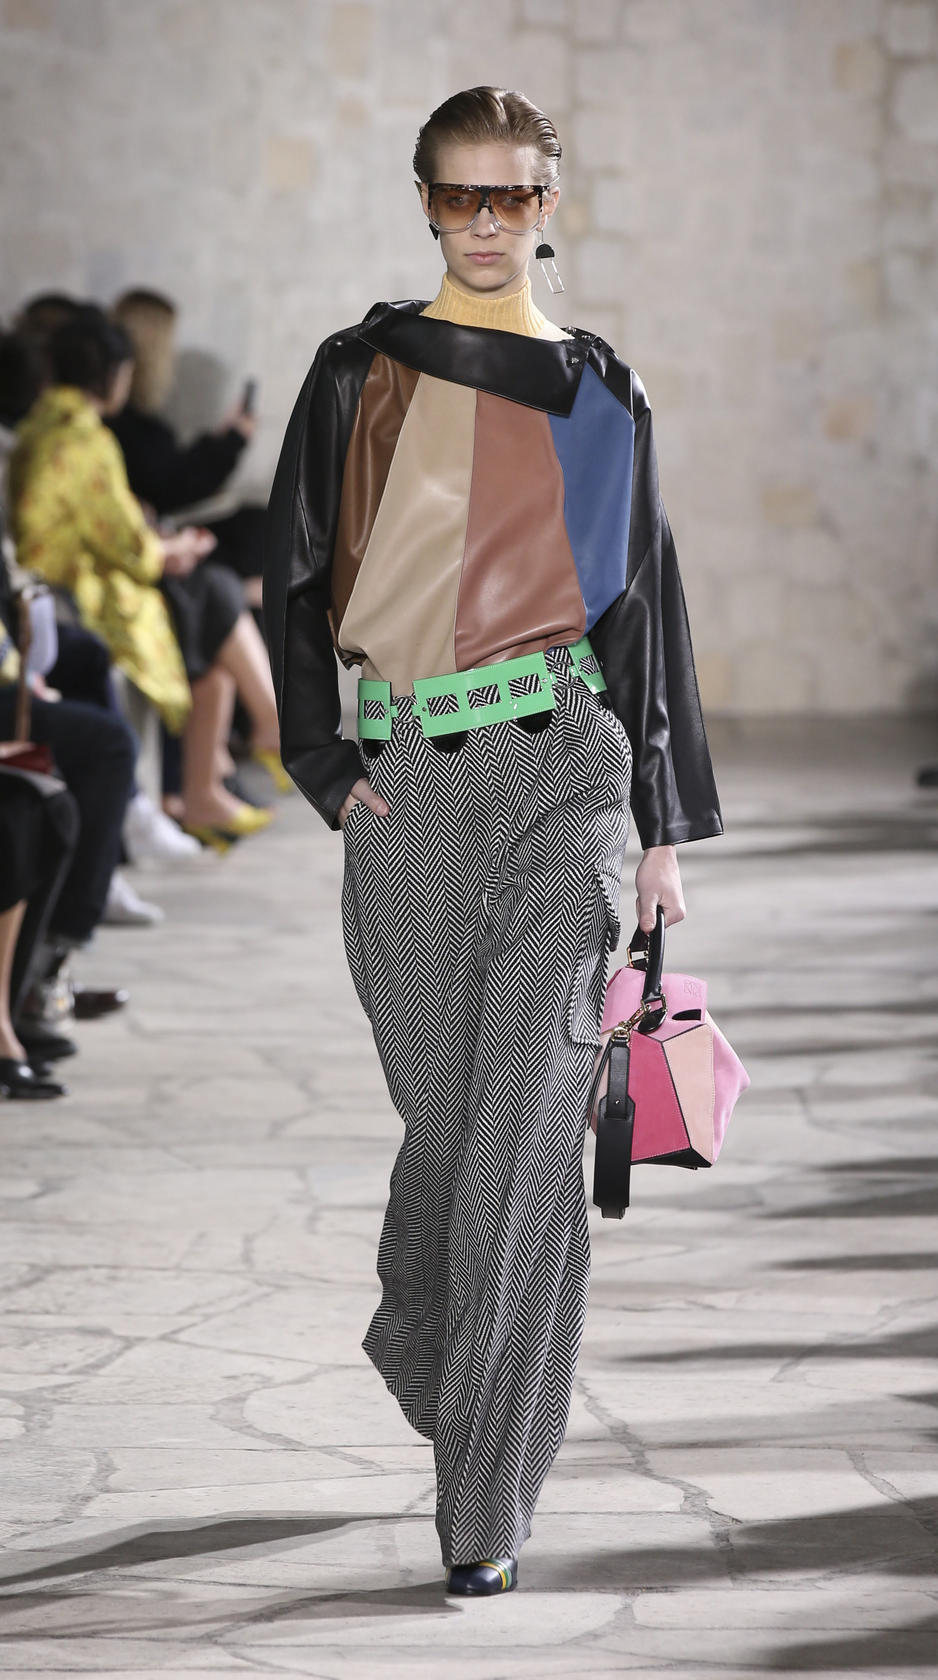 Jonathan Anderson breathes fresh air into the Spanish heritage brand Loewe